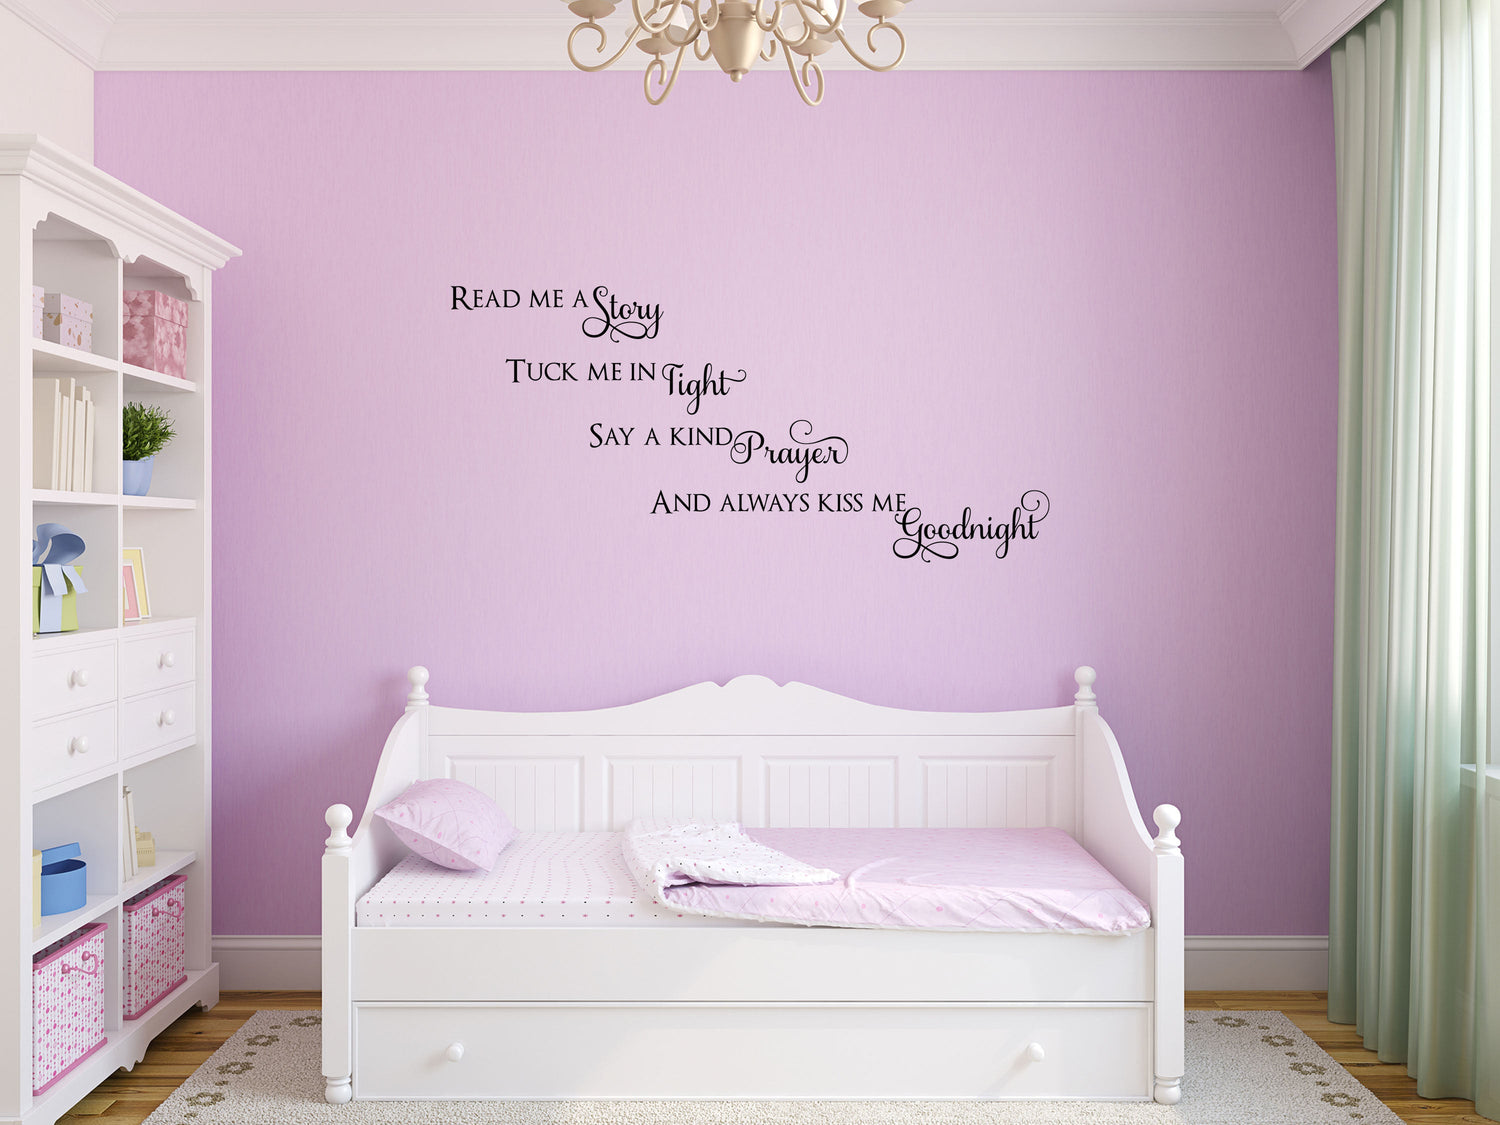 Kiss Me Goodnight - Inspirational Wall Decals Vinyl Wall Decal Inspirational Wall Signs 